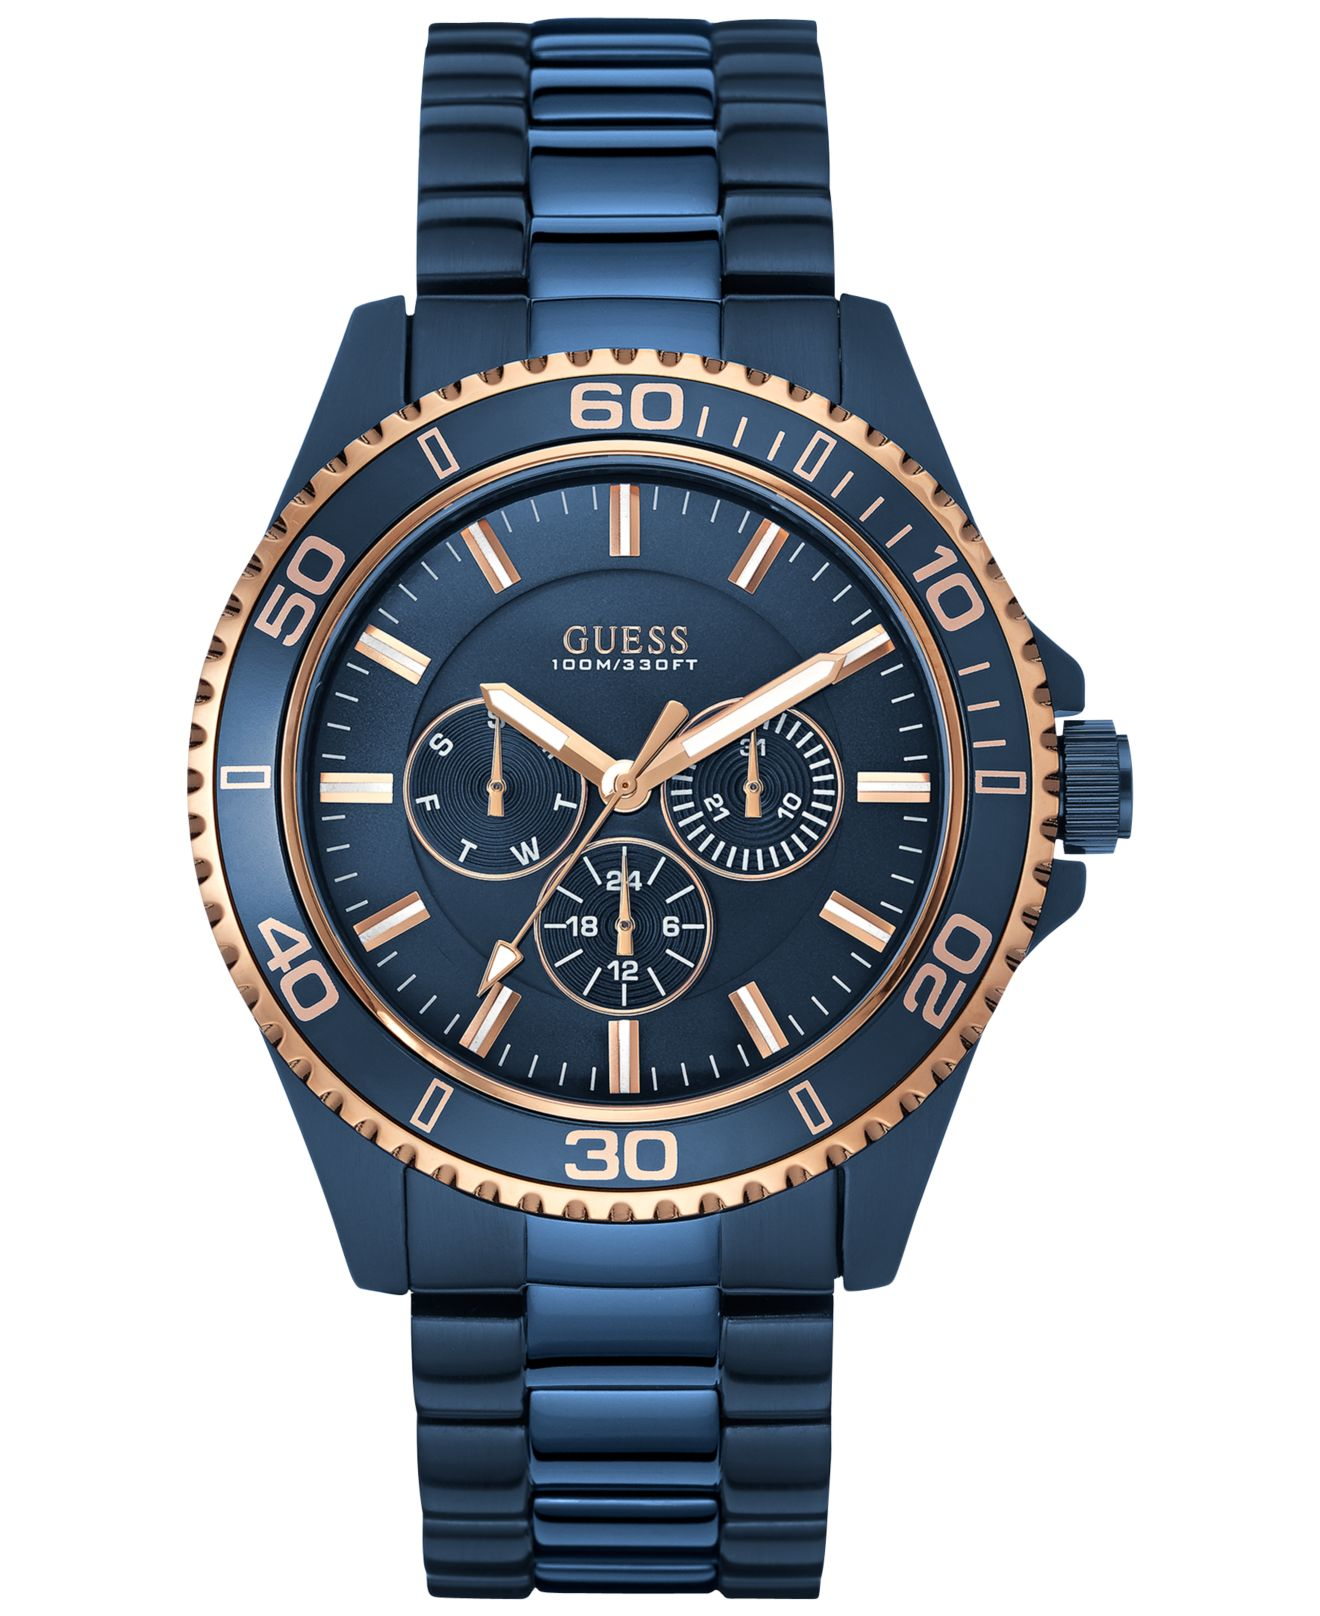 Lyst - Guess Men's Blue Ion-plated Stainless Steel Bracelet Watch 45mm